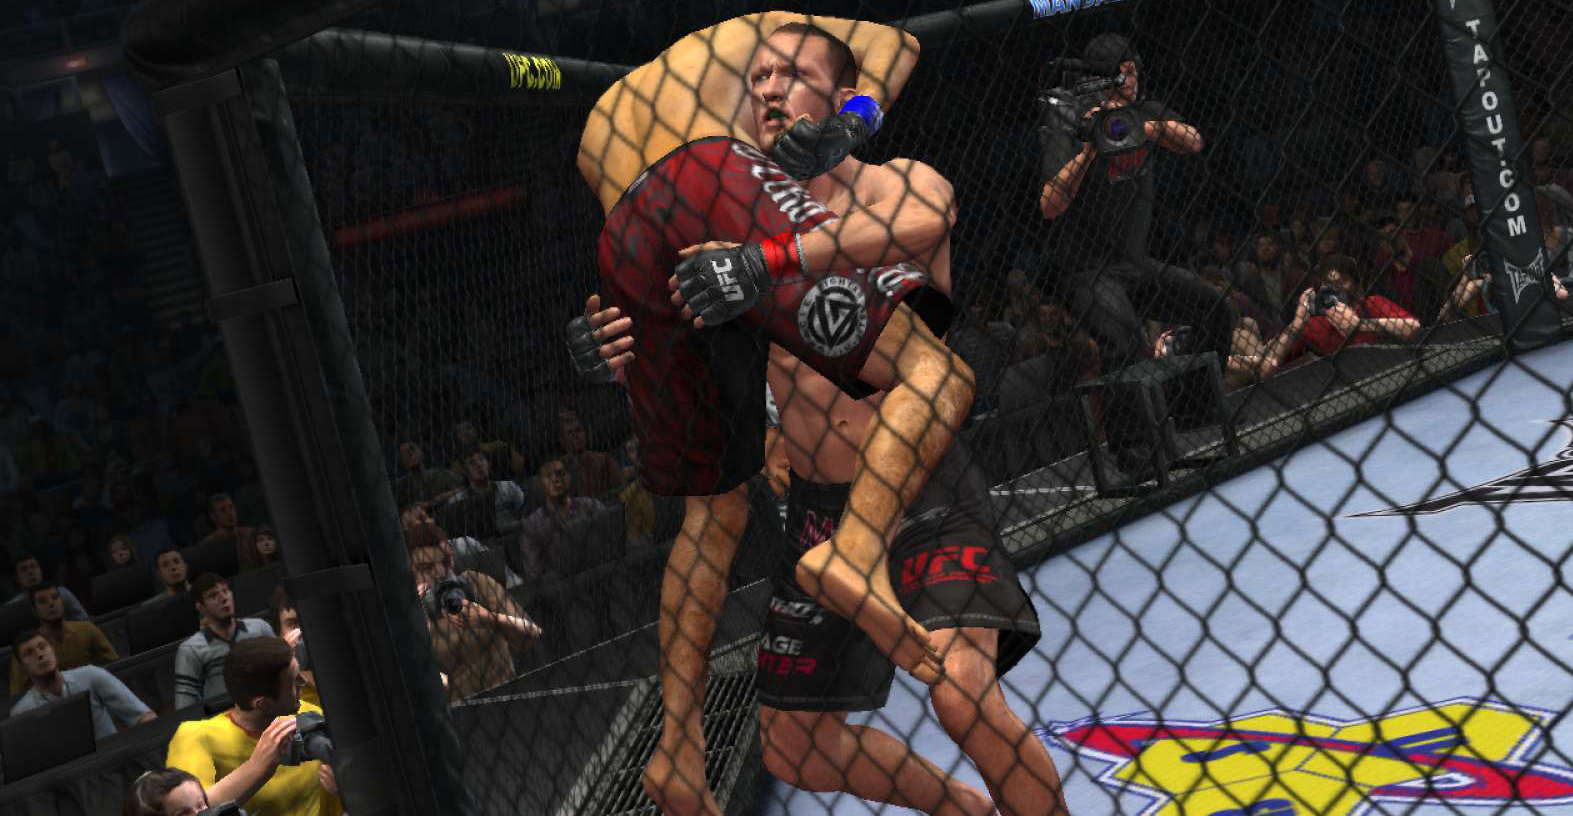 UFC Undisputed 3 vs UFC 2010 screenshots of the Fight Cage